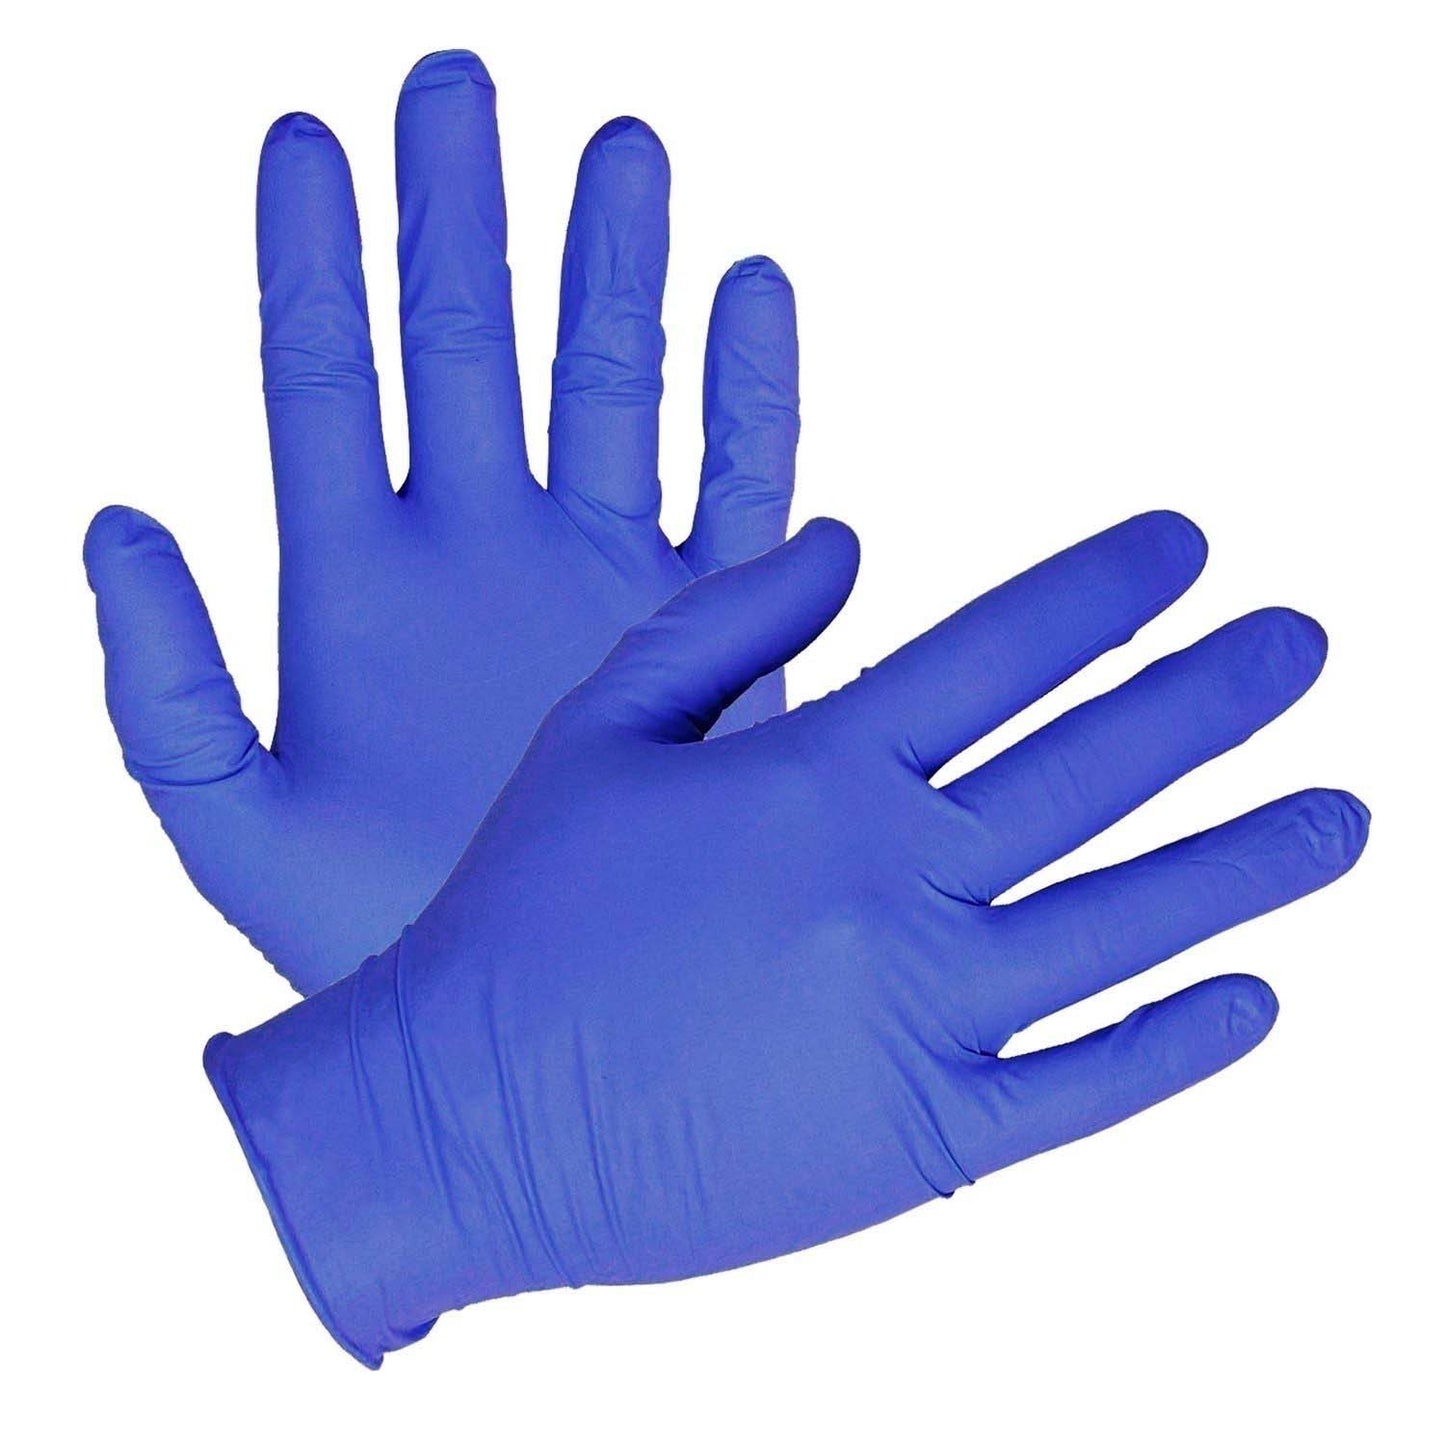 A pair of periwinkle Color Nitrile Gloves.